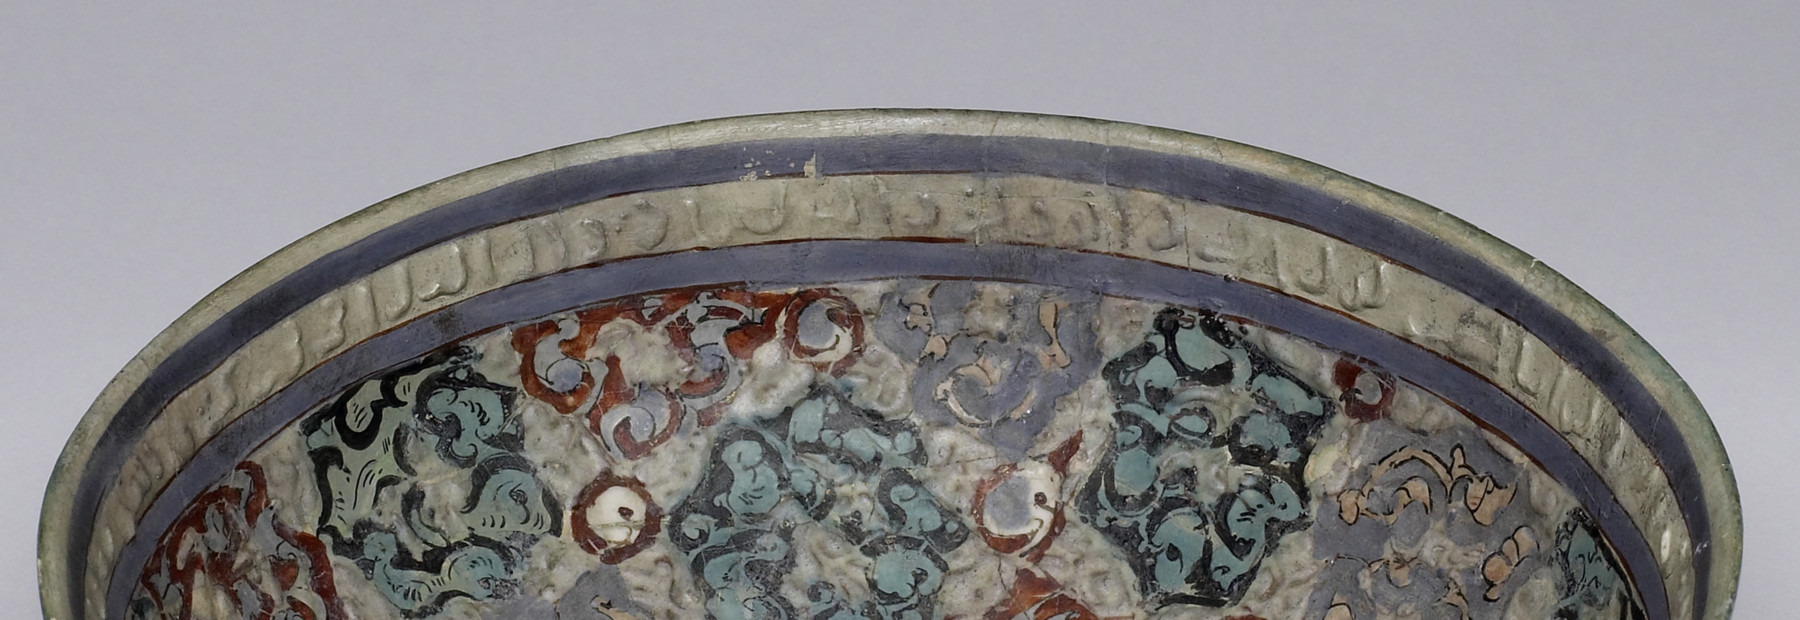 Image for Bowl with Star and Cross Patterns
